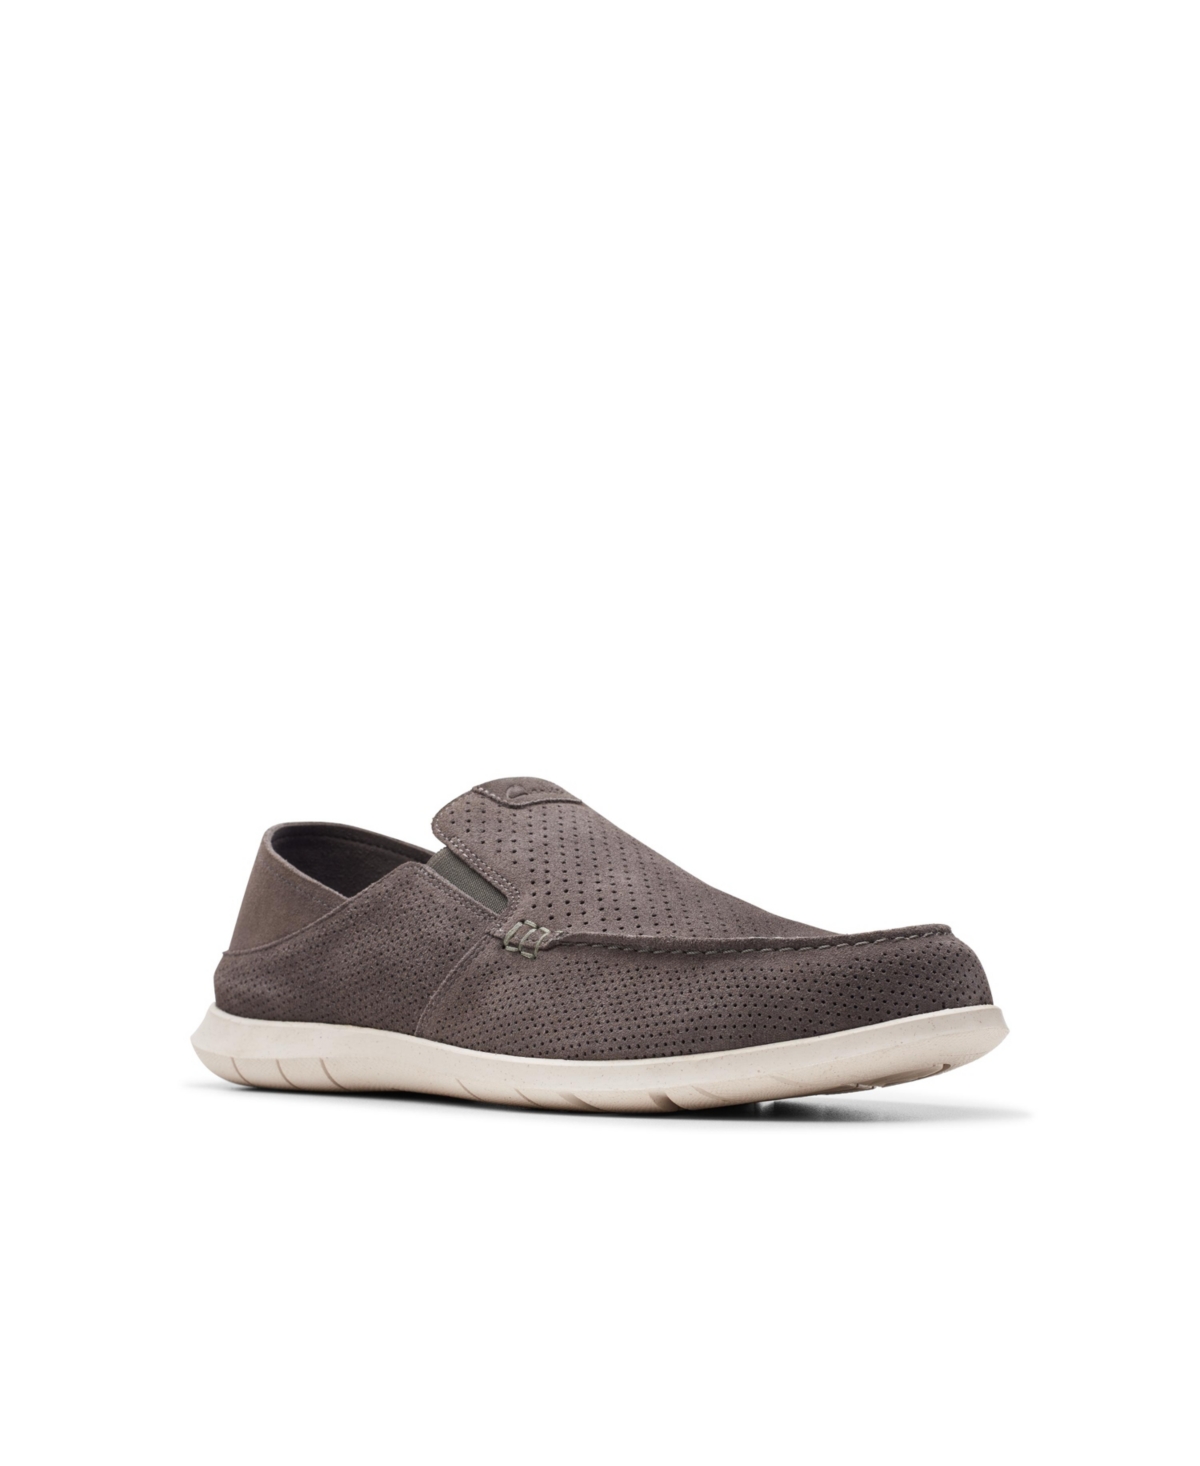 Men's Collection Flexway Easy Slip On Shoes - Light Tan Suede